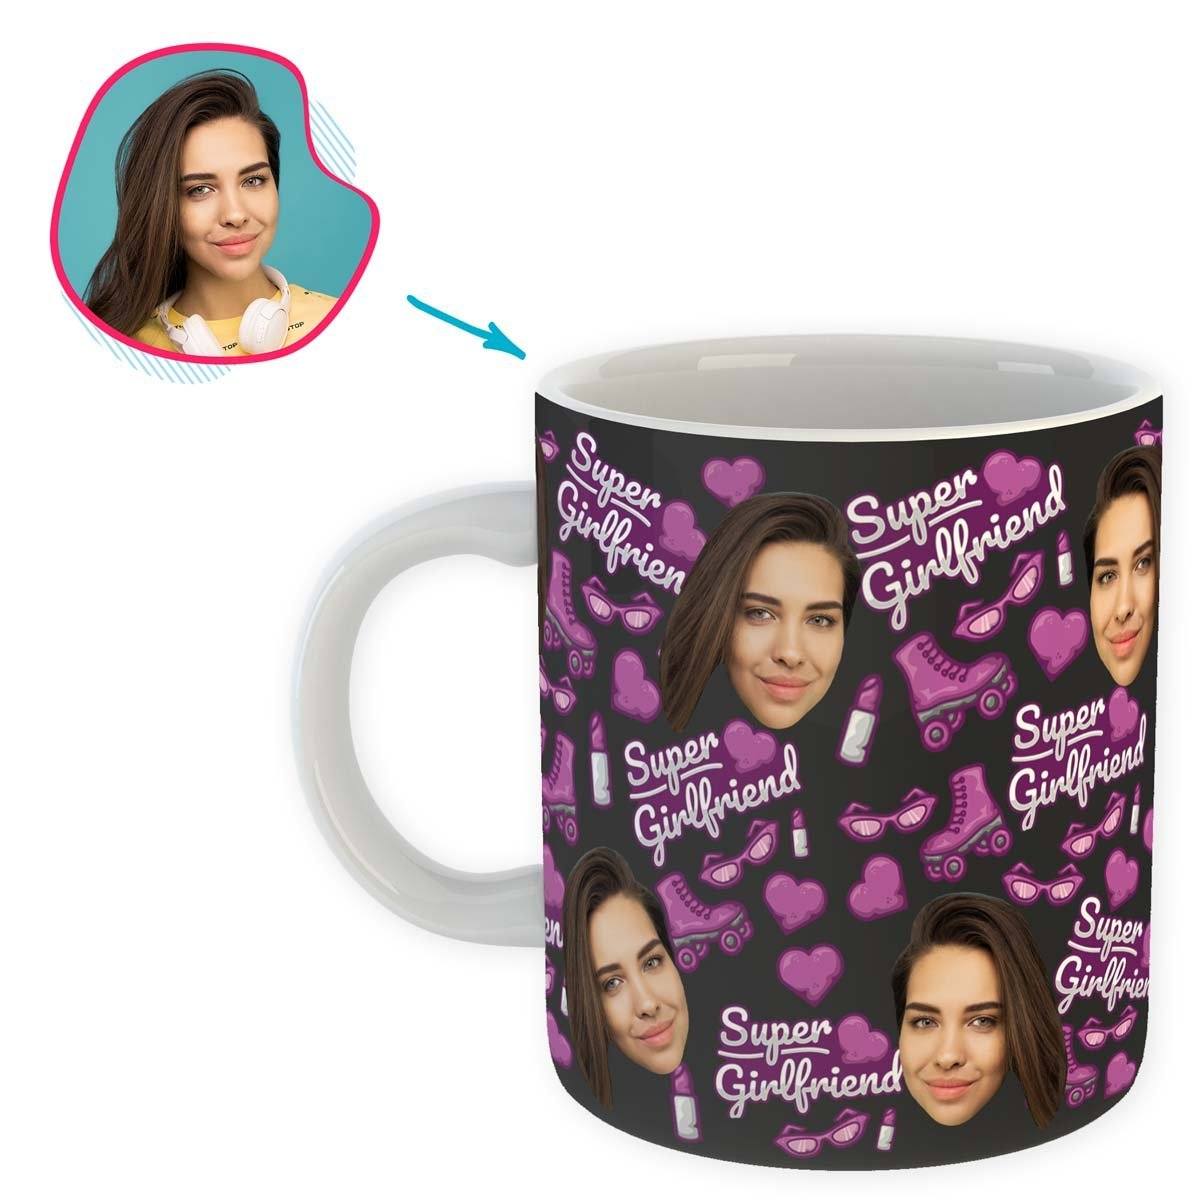 Dark Girlfriend personalized mug with photo of face printed on it